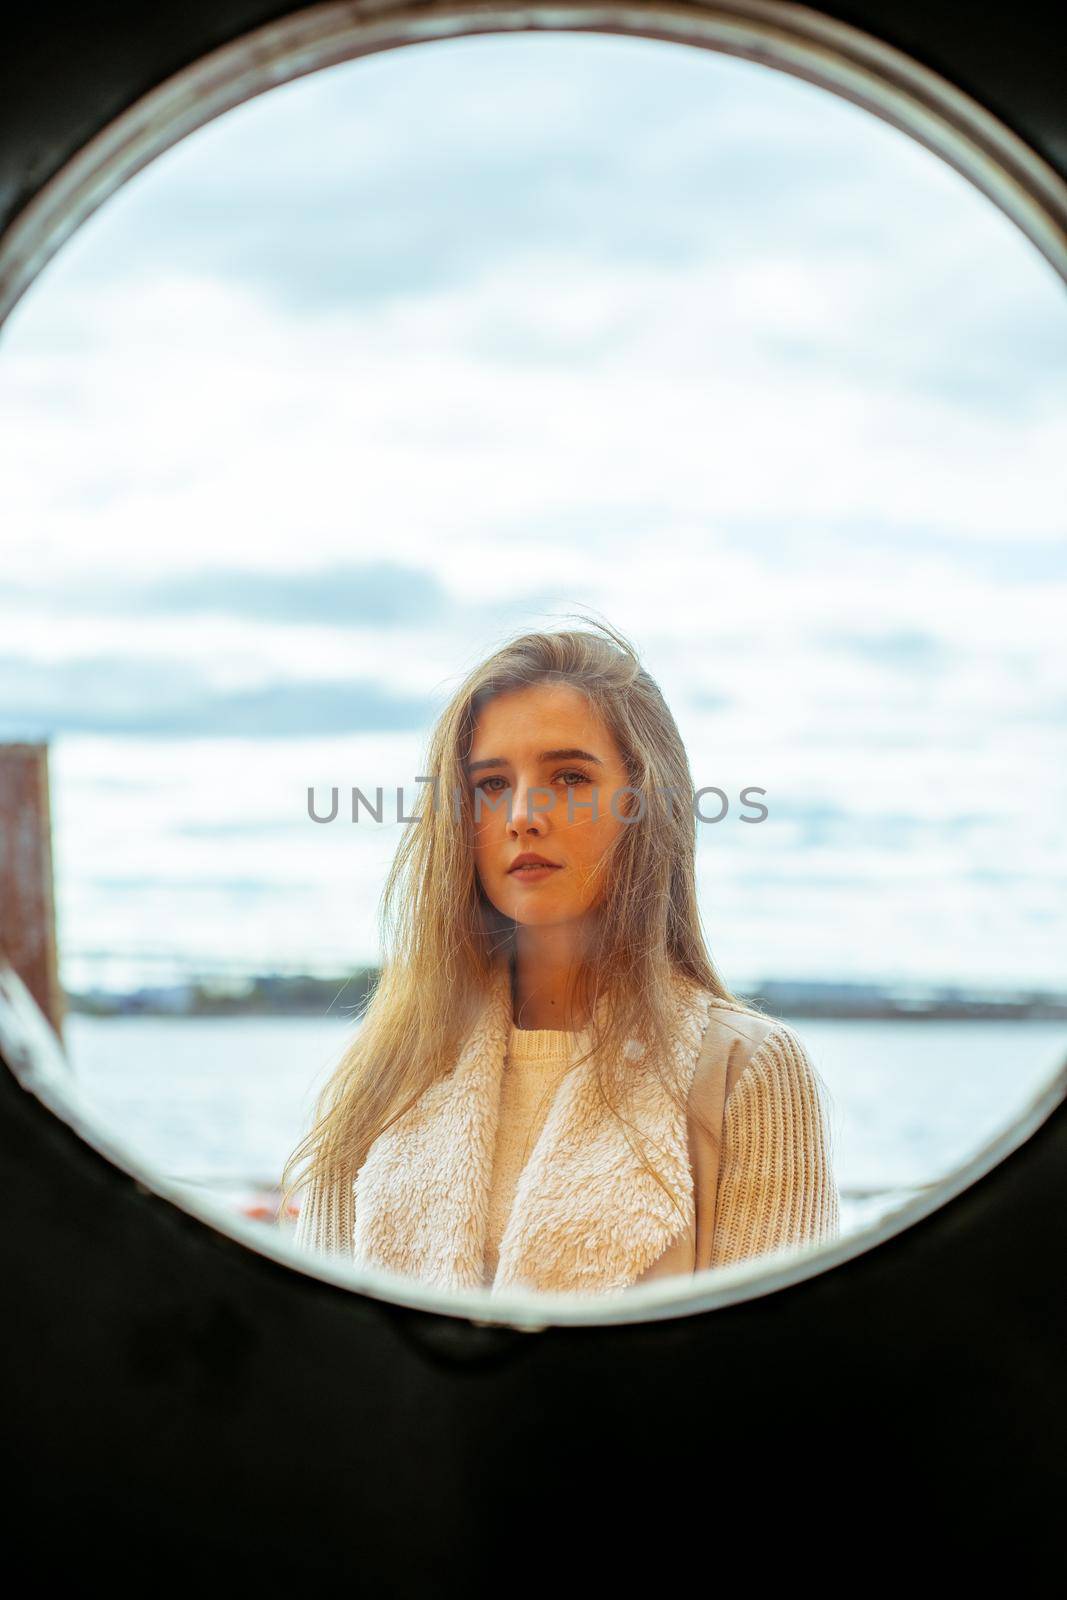 The face of young girl in round frame window on background of sea, ocean, on waterfront. Portrait in circle, backlit, vertical by NataBene